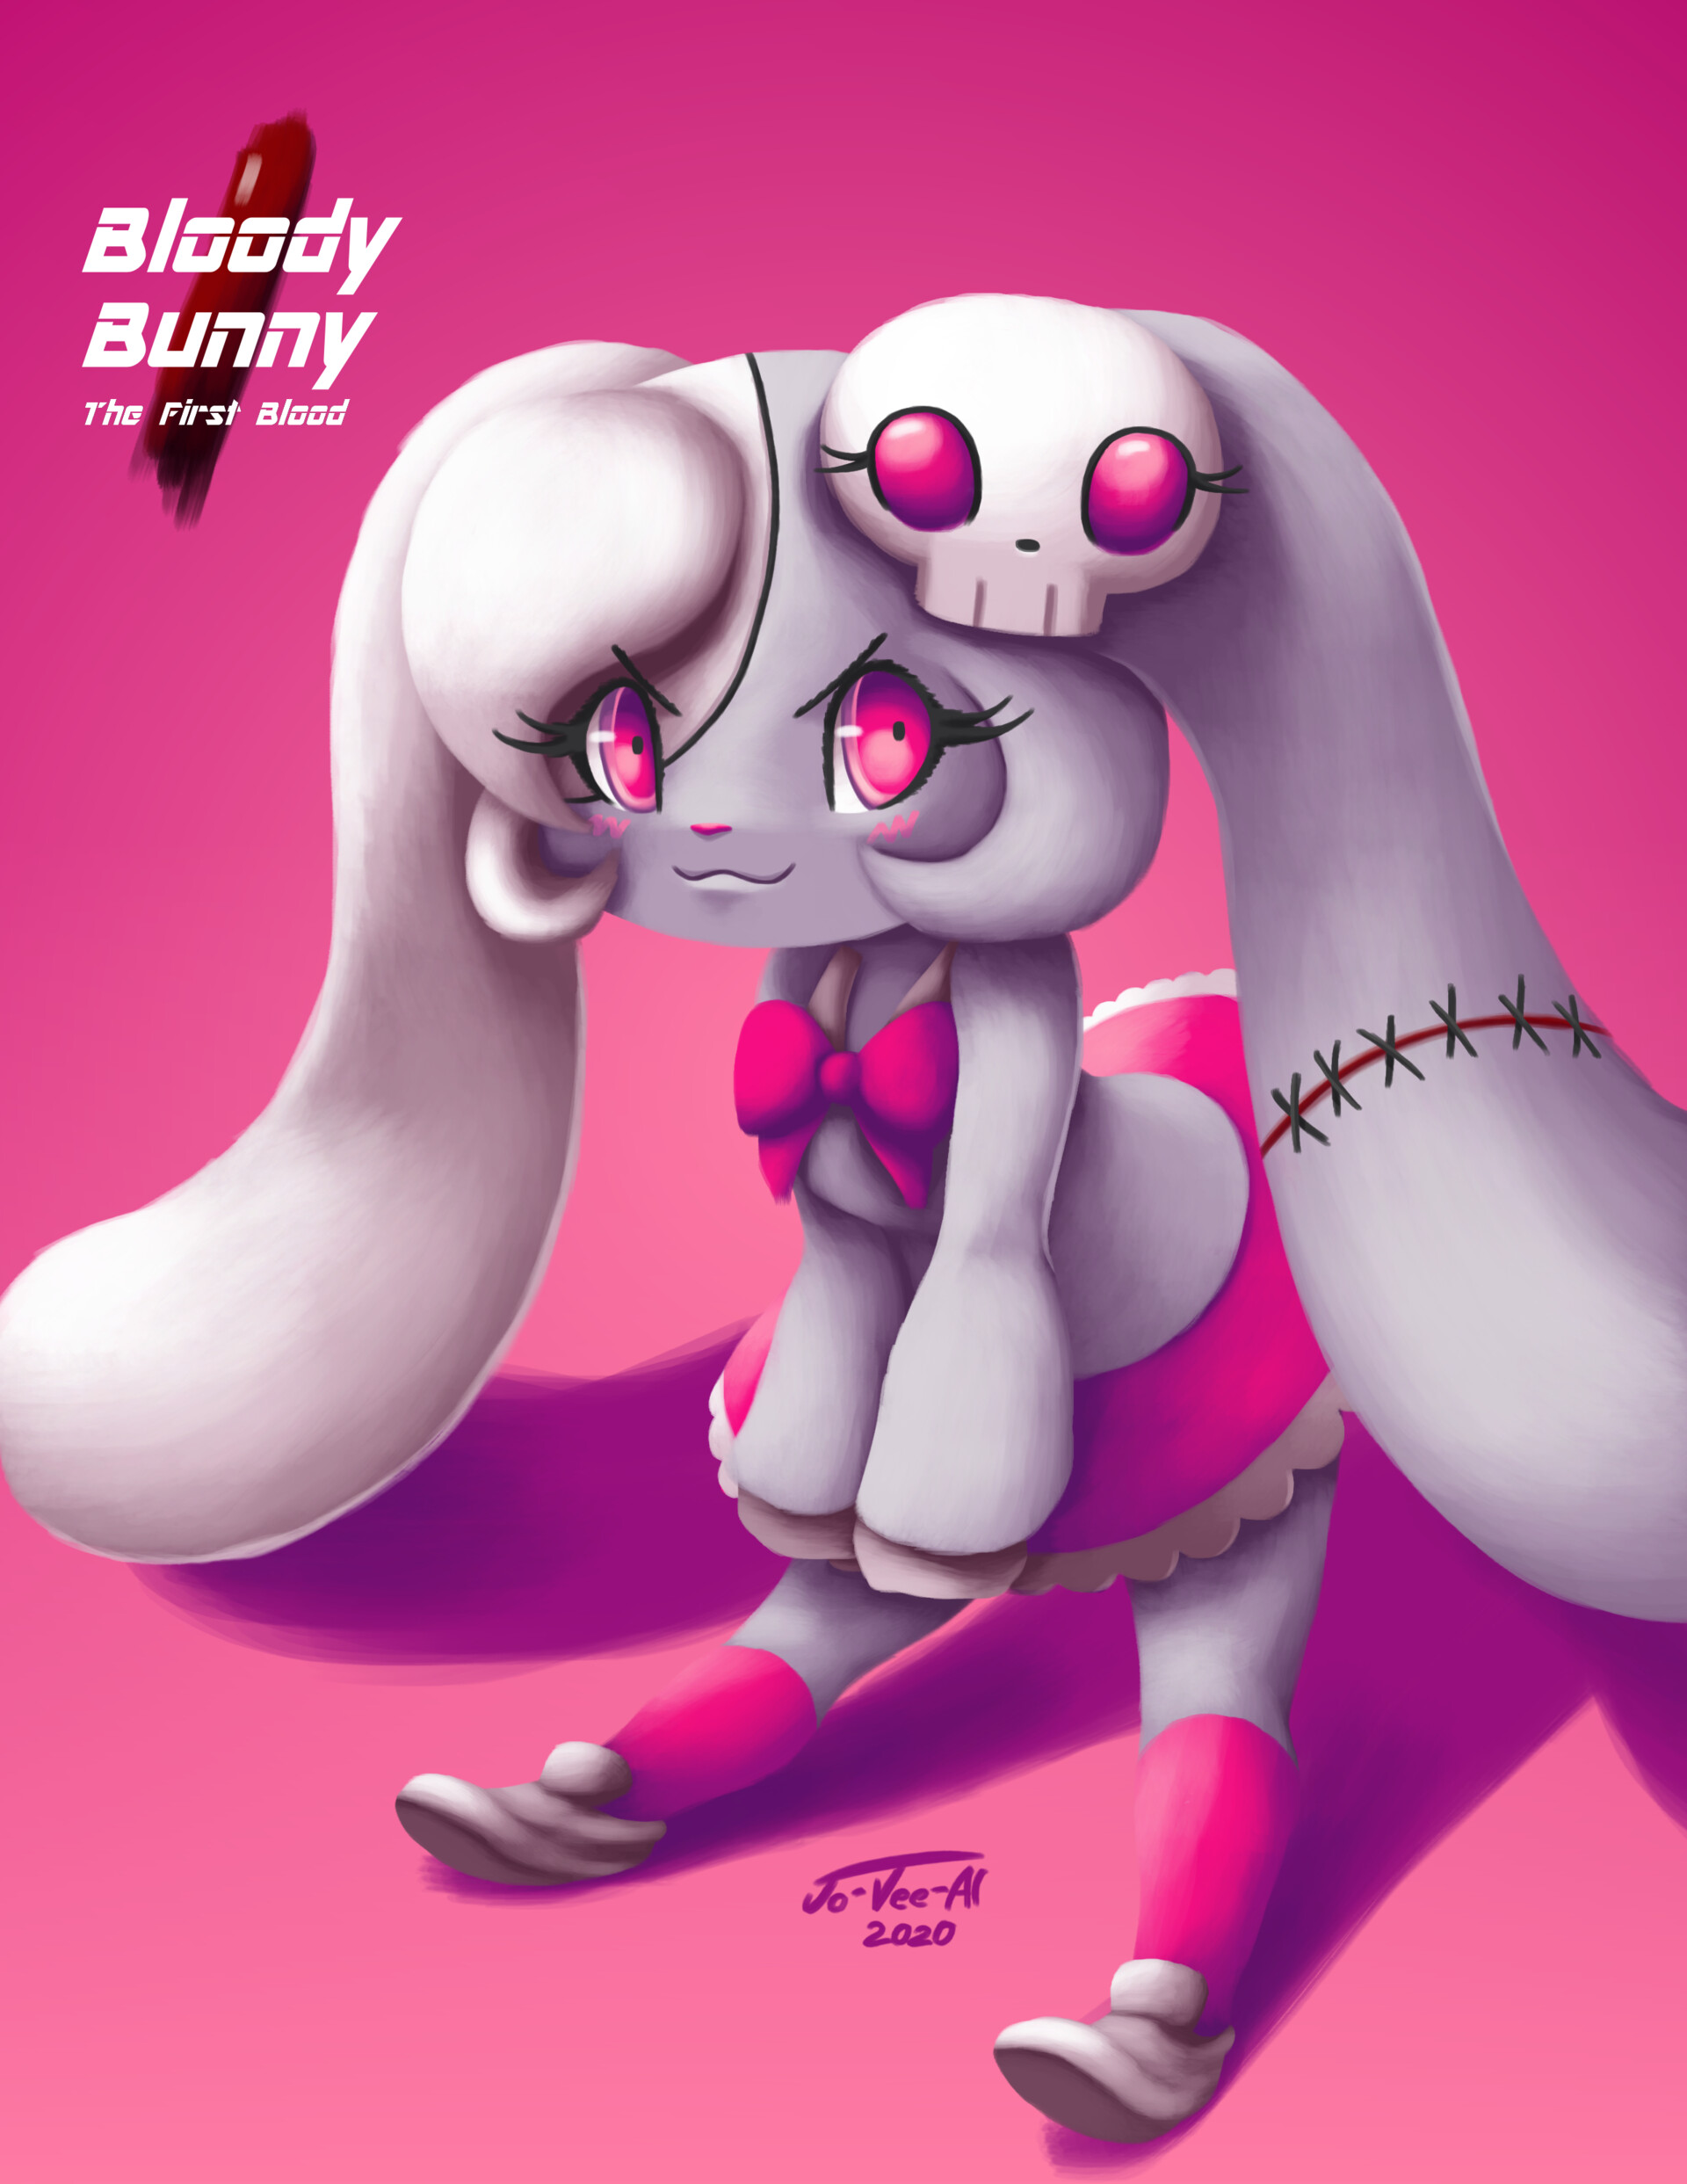 My fanart depiction of Mumu from "Bloody Bunny: The First Blood.&a...